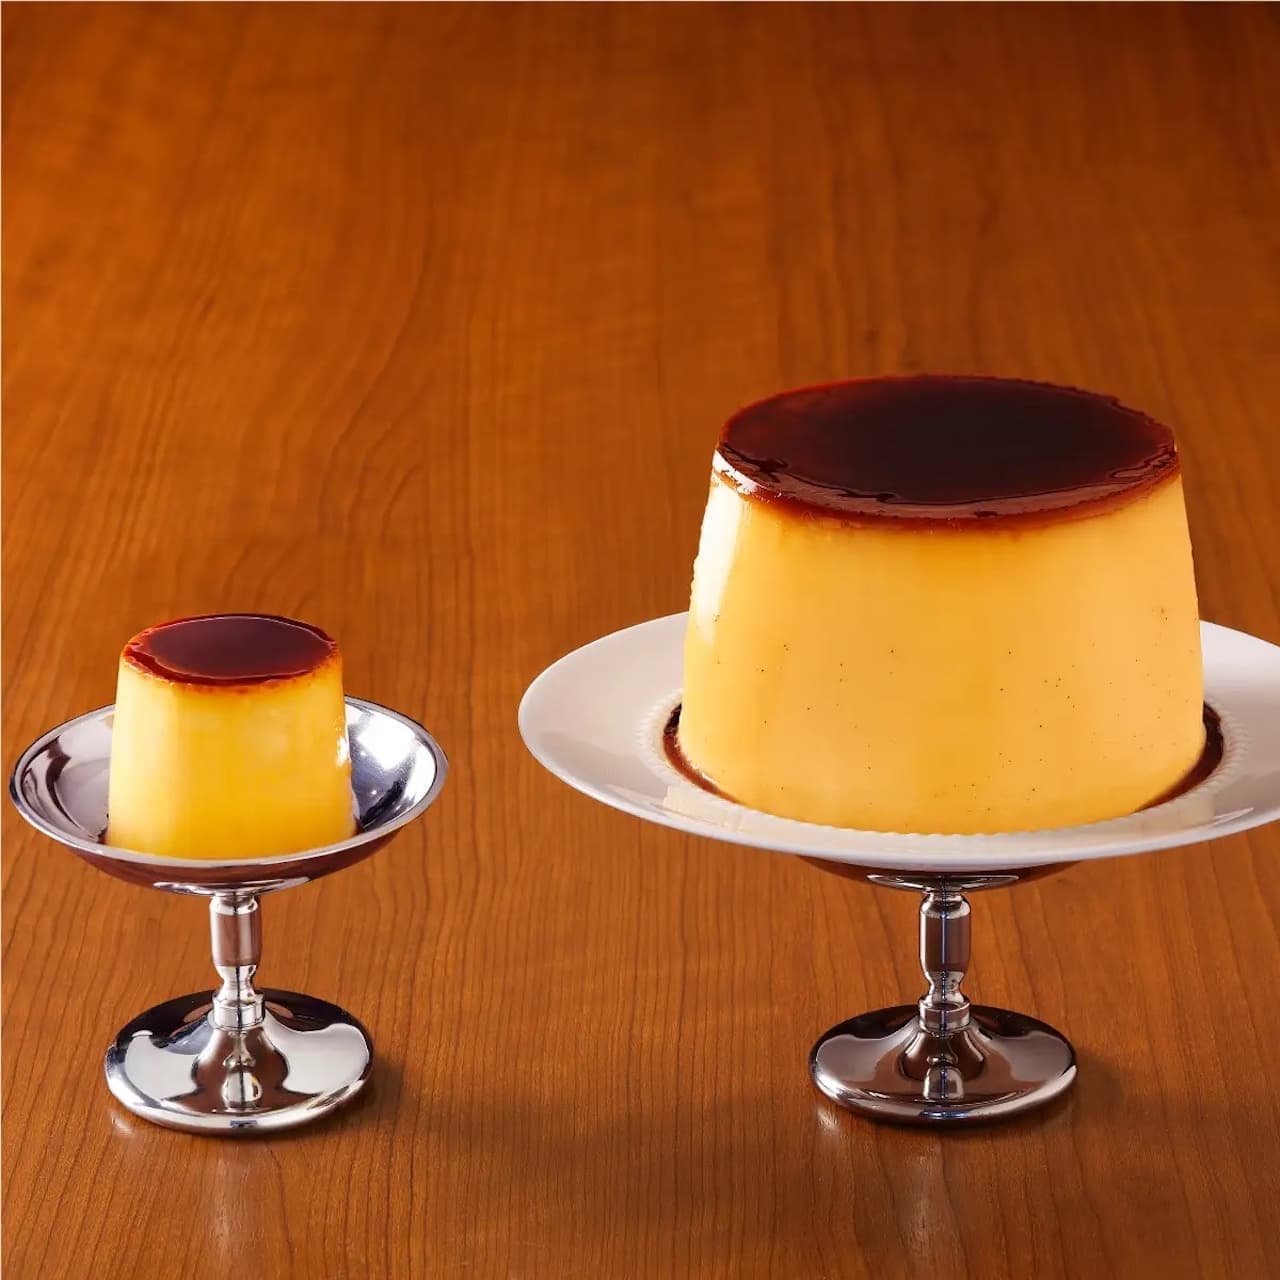 In love with pudding, "Bucket de Retro Pudding"